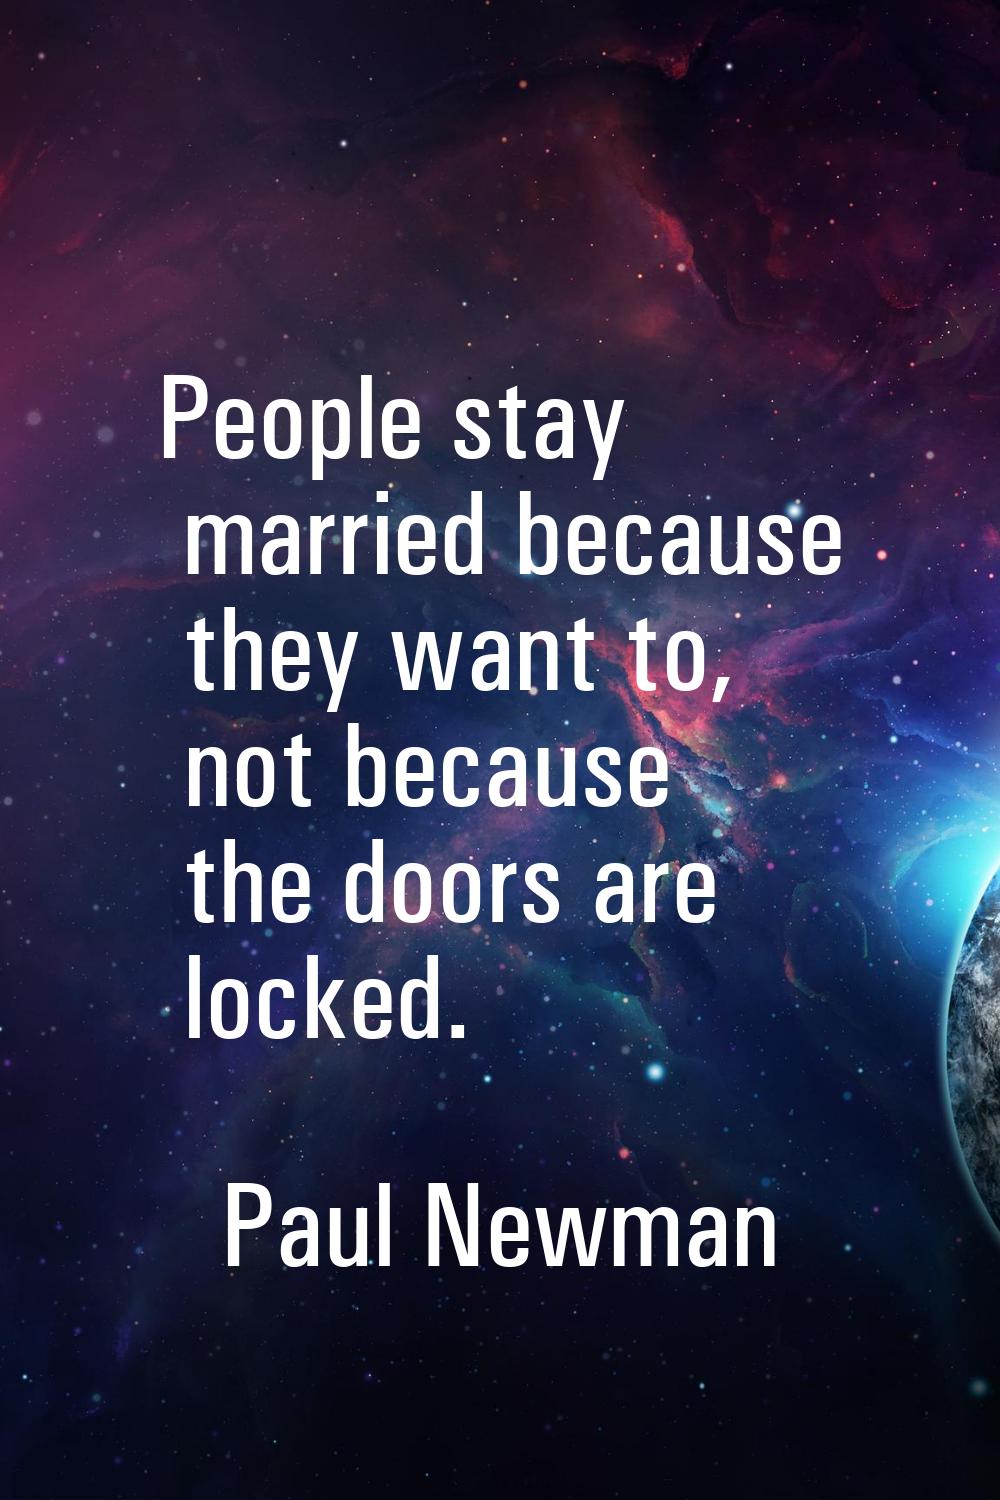 People stay married because they want to, not because the doors are locked.